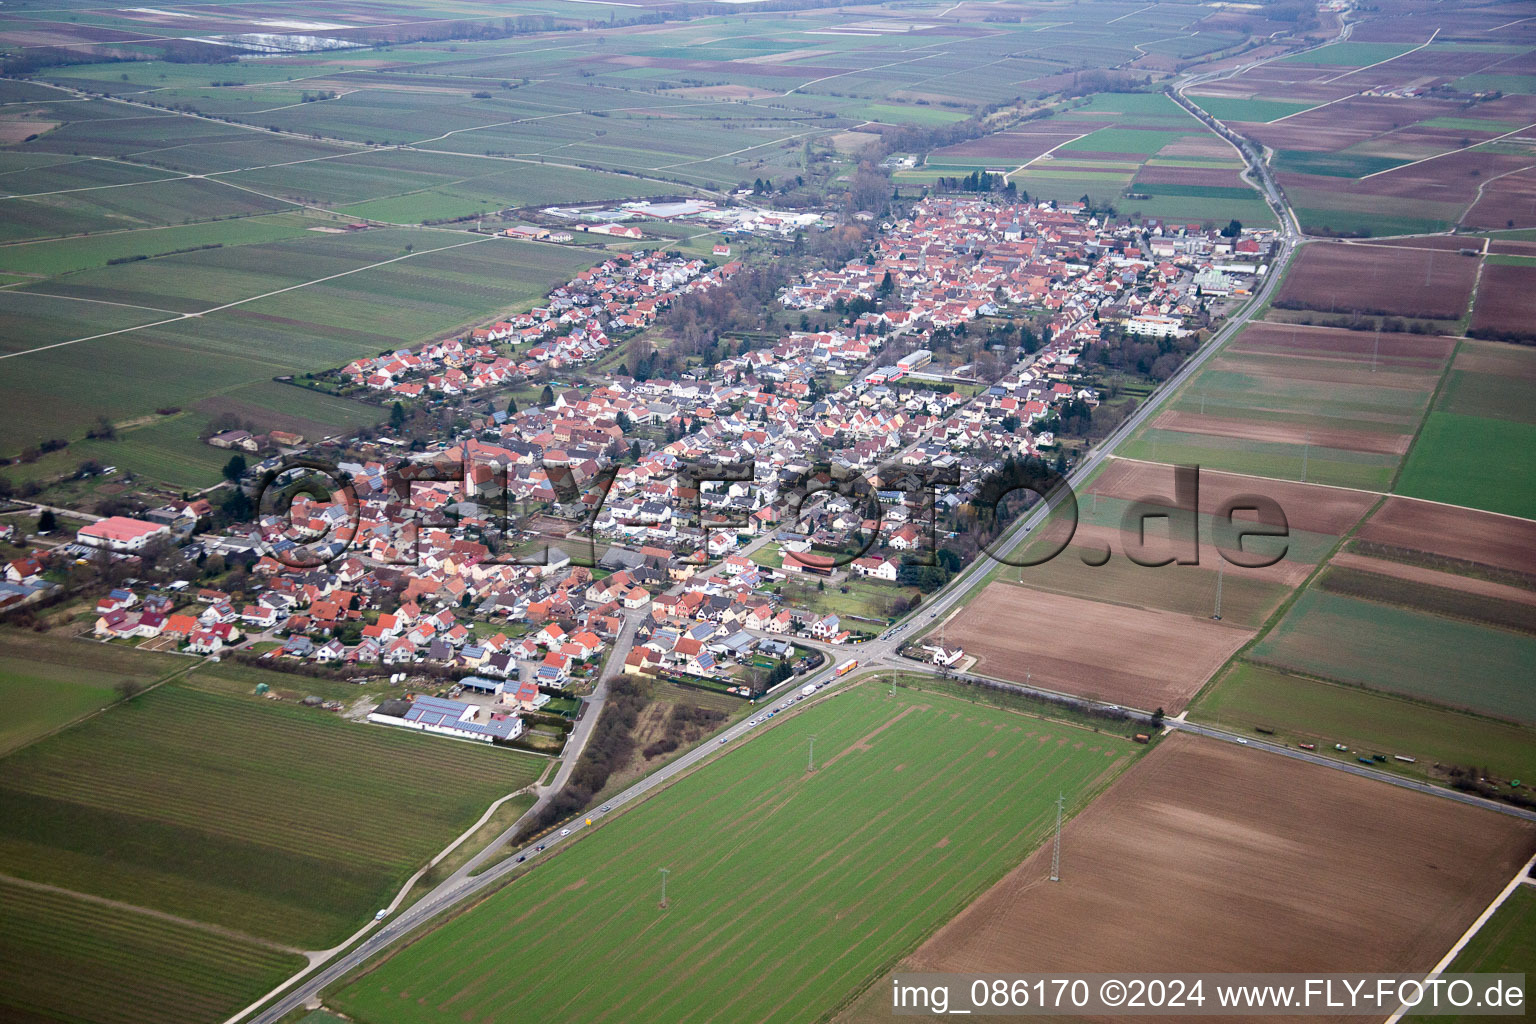 Essingen in the state Rhineland-Palatinate, Germany seen from above